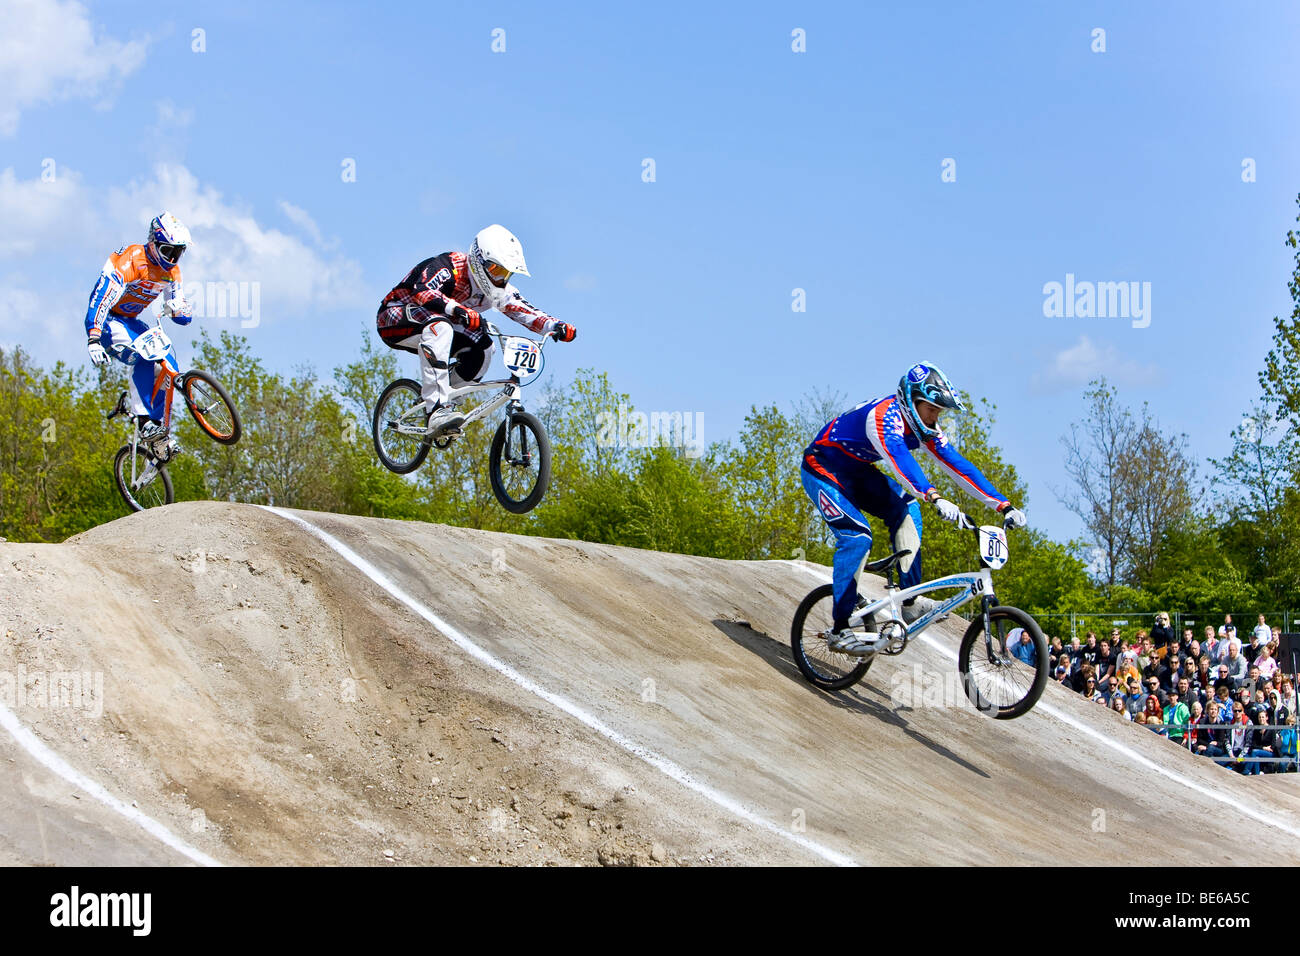 Three jumping competitors at the BMX Supercross World Cup in Copenhagen, Denmark, Europe Stock Photo